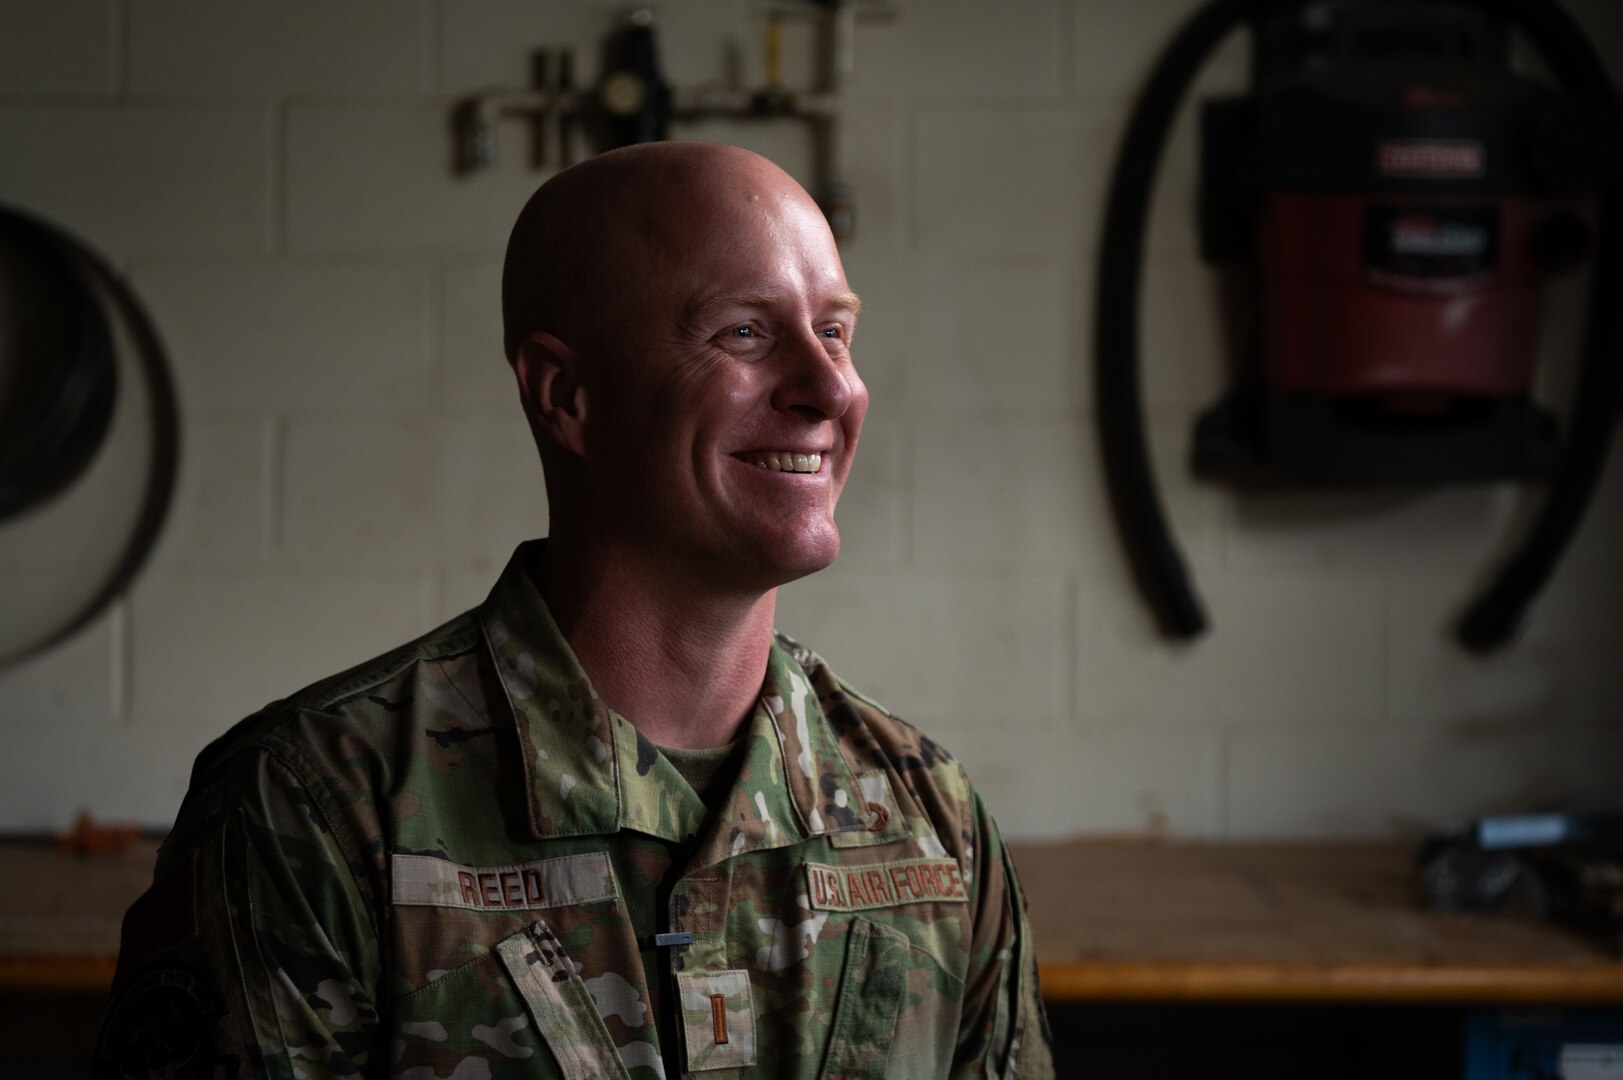 U.S. Air Force 2nd Lt. Ben Reed, a base civil engineer with the 182nd Civil Engineer Squadron, Illinois Air National Guard, poses for a portrait during an interview at the 182nd Airlift Wing, Peoria, Illinois, Feb. 2, 2024.